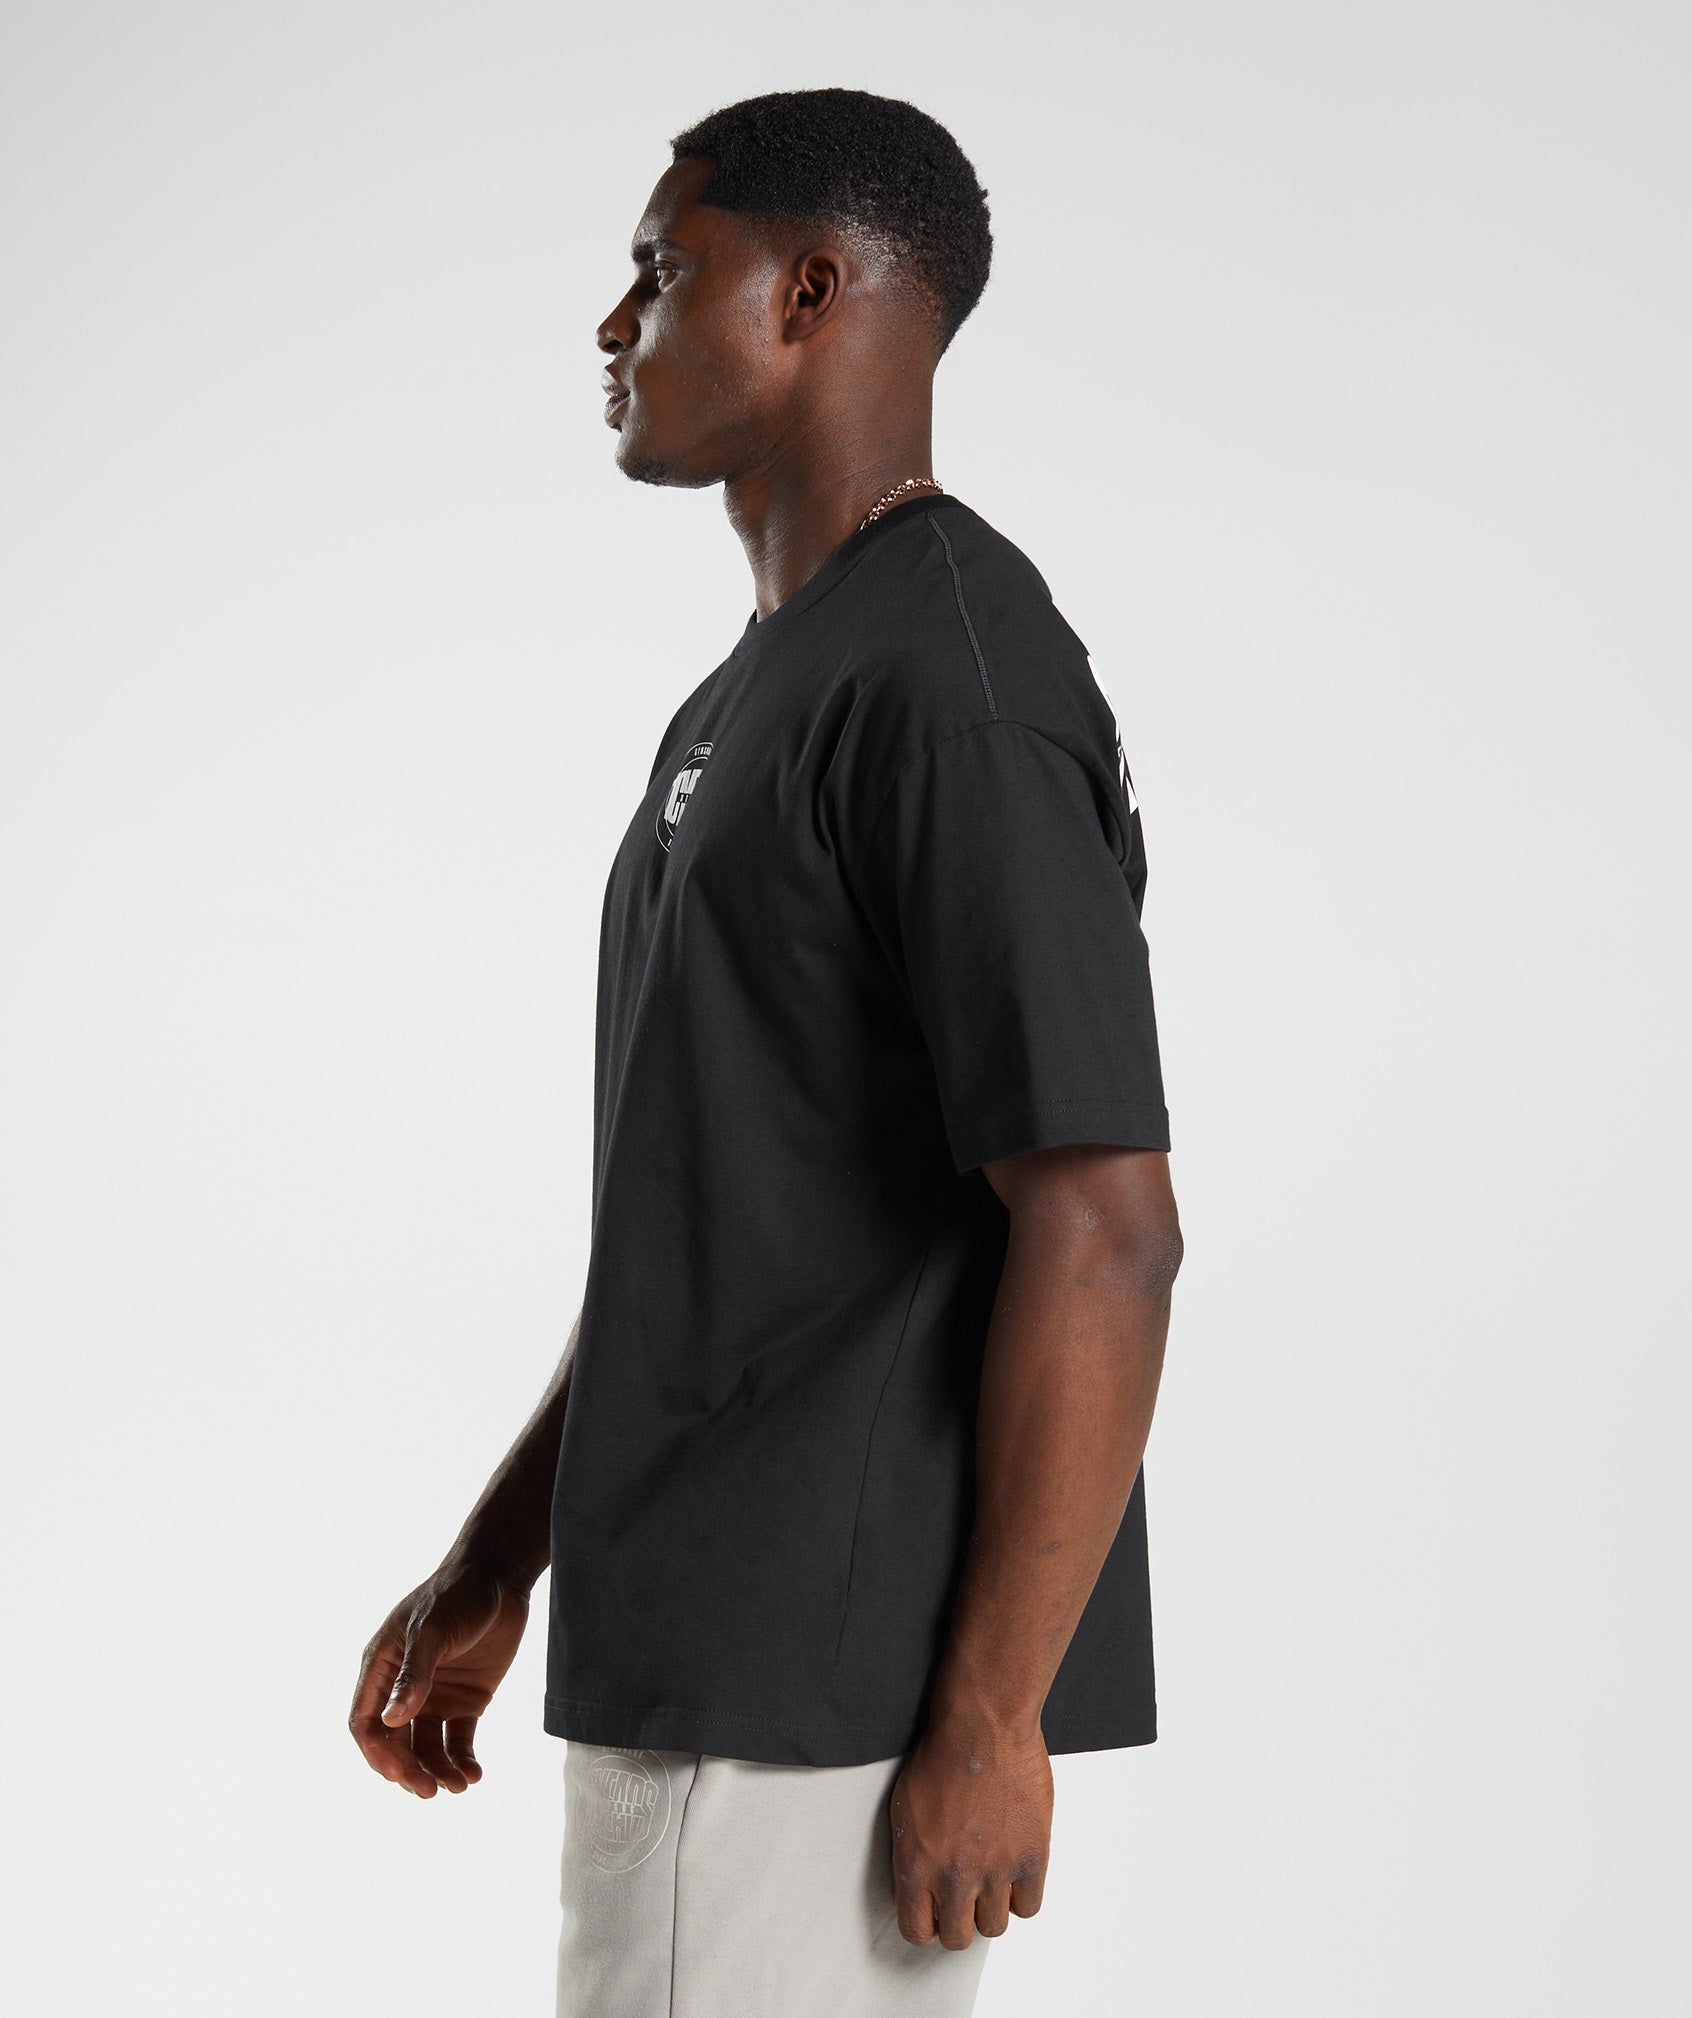 GS10 Year Oversized T-Shirt in Black - view 3